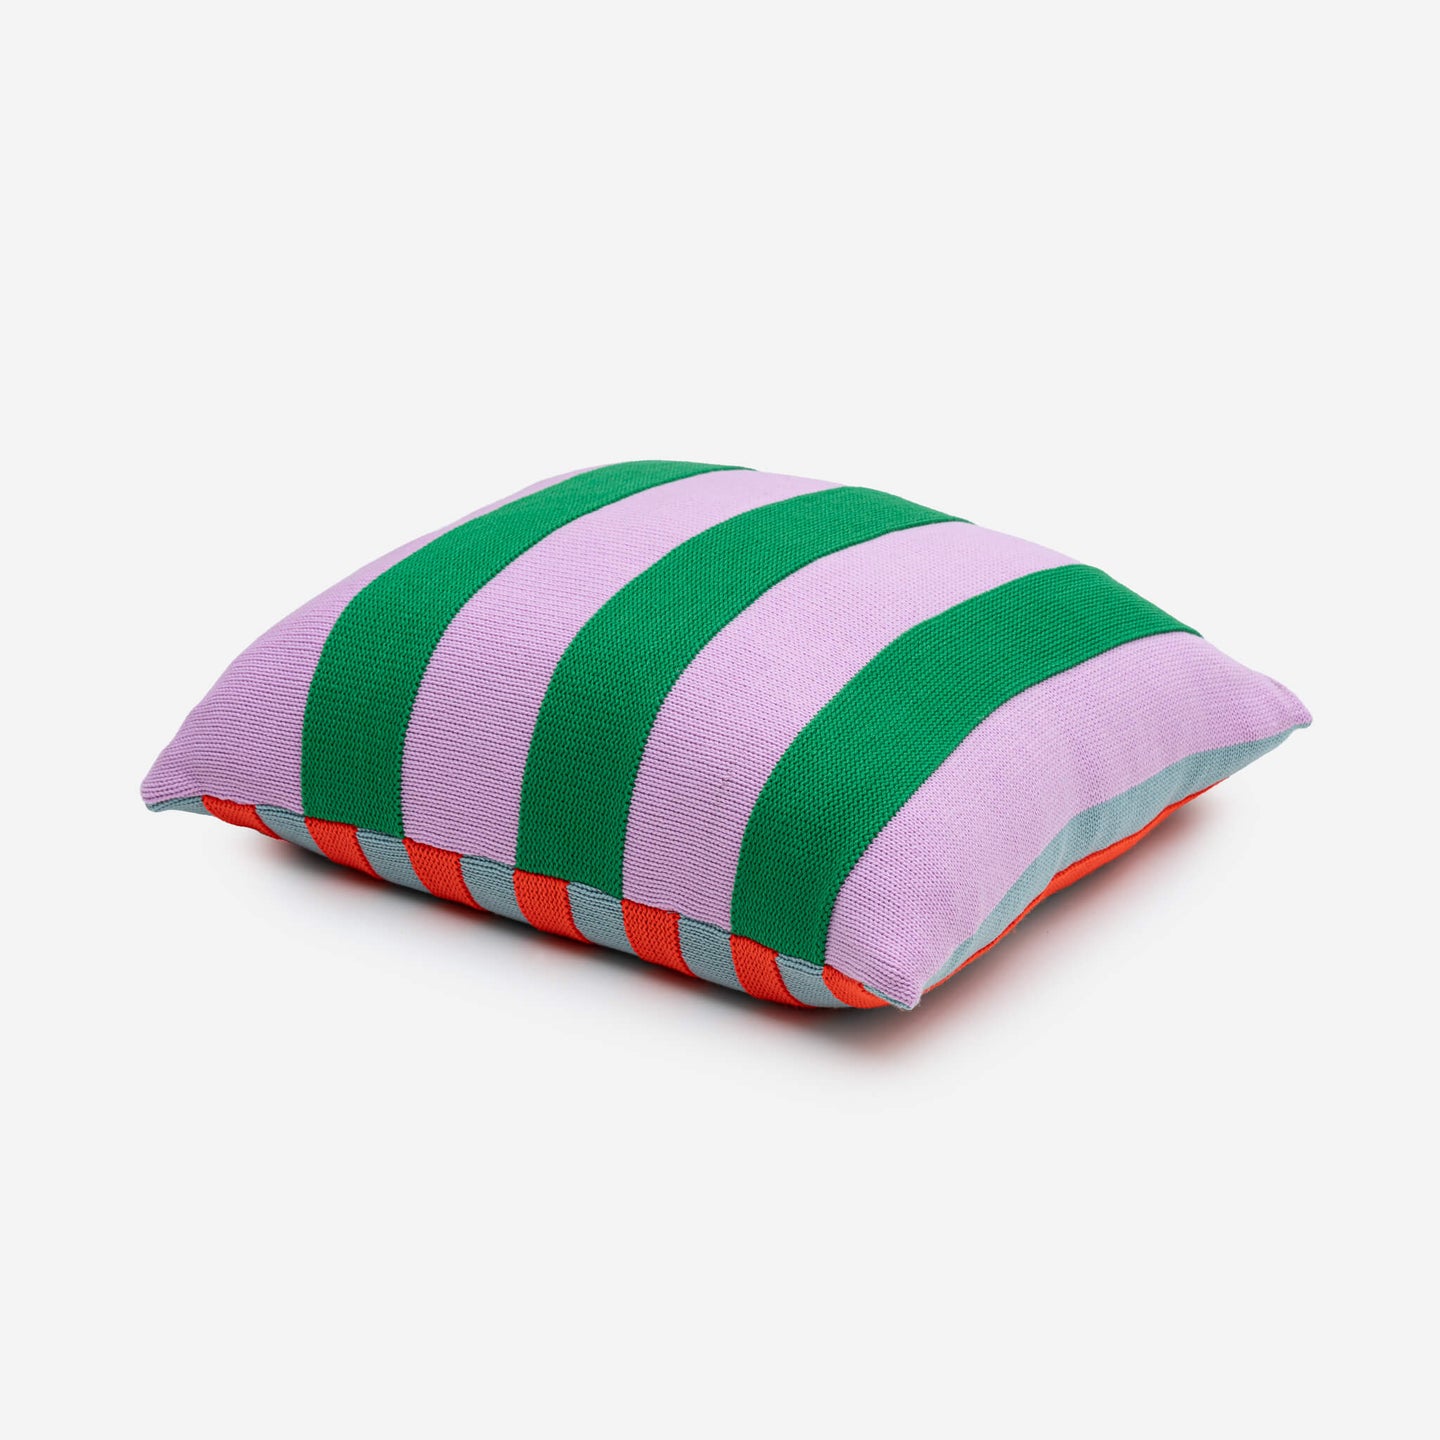 Super Stripe Raised Textured Pillow Cover Accent Colorful Green Purple Lilac Reveresible